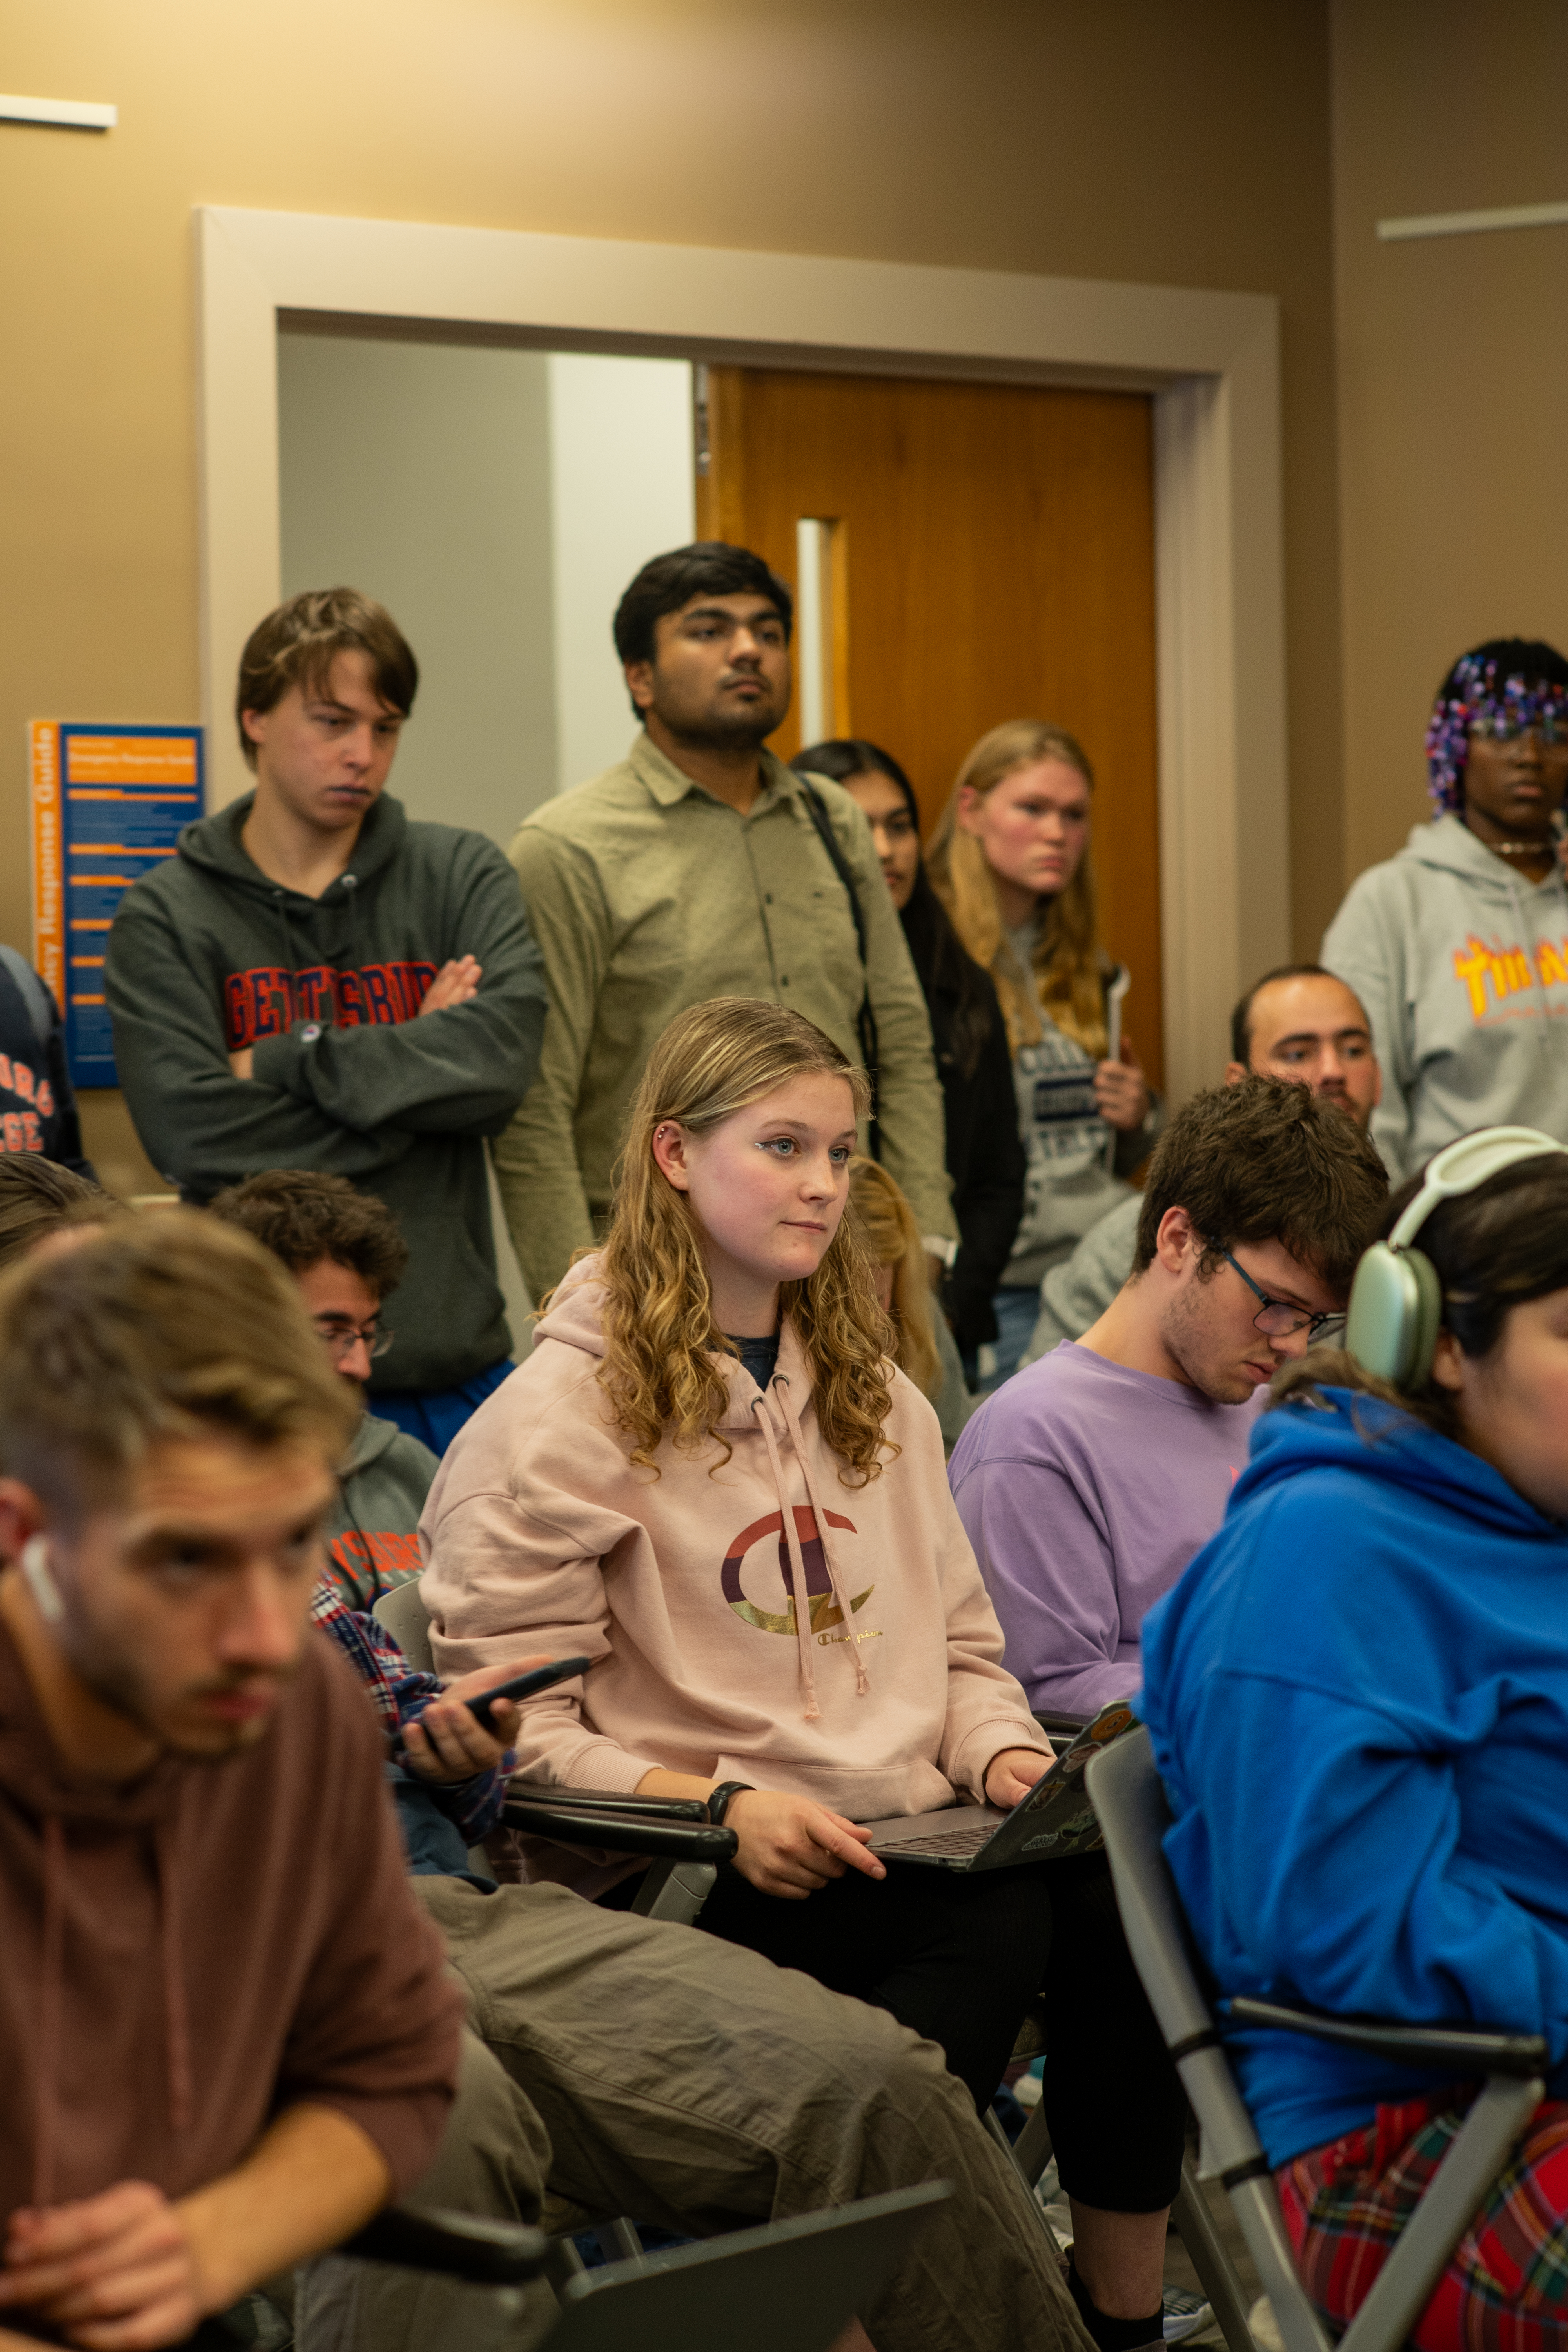 Students listening to the presentation by President Iuliano, Dean Ehrlich, and Provost Bookwala. (Photo William Oehler/The Gettysburgian)